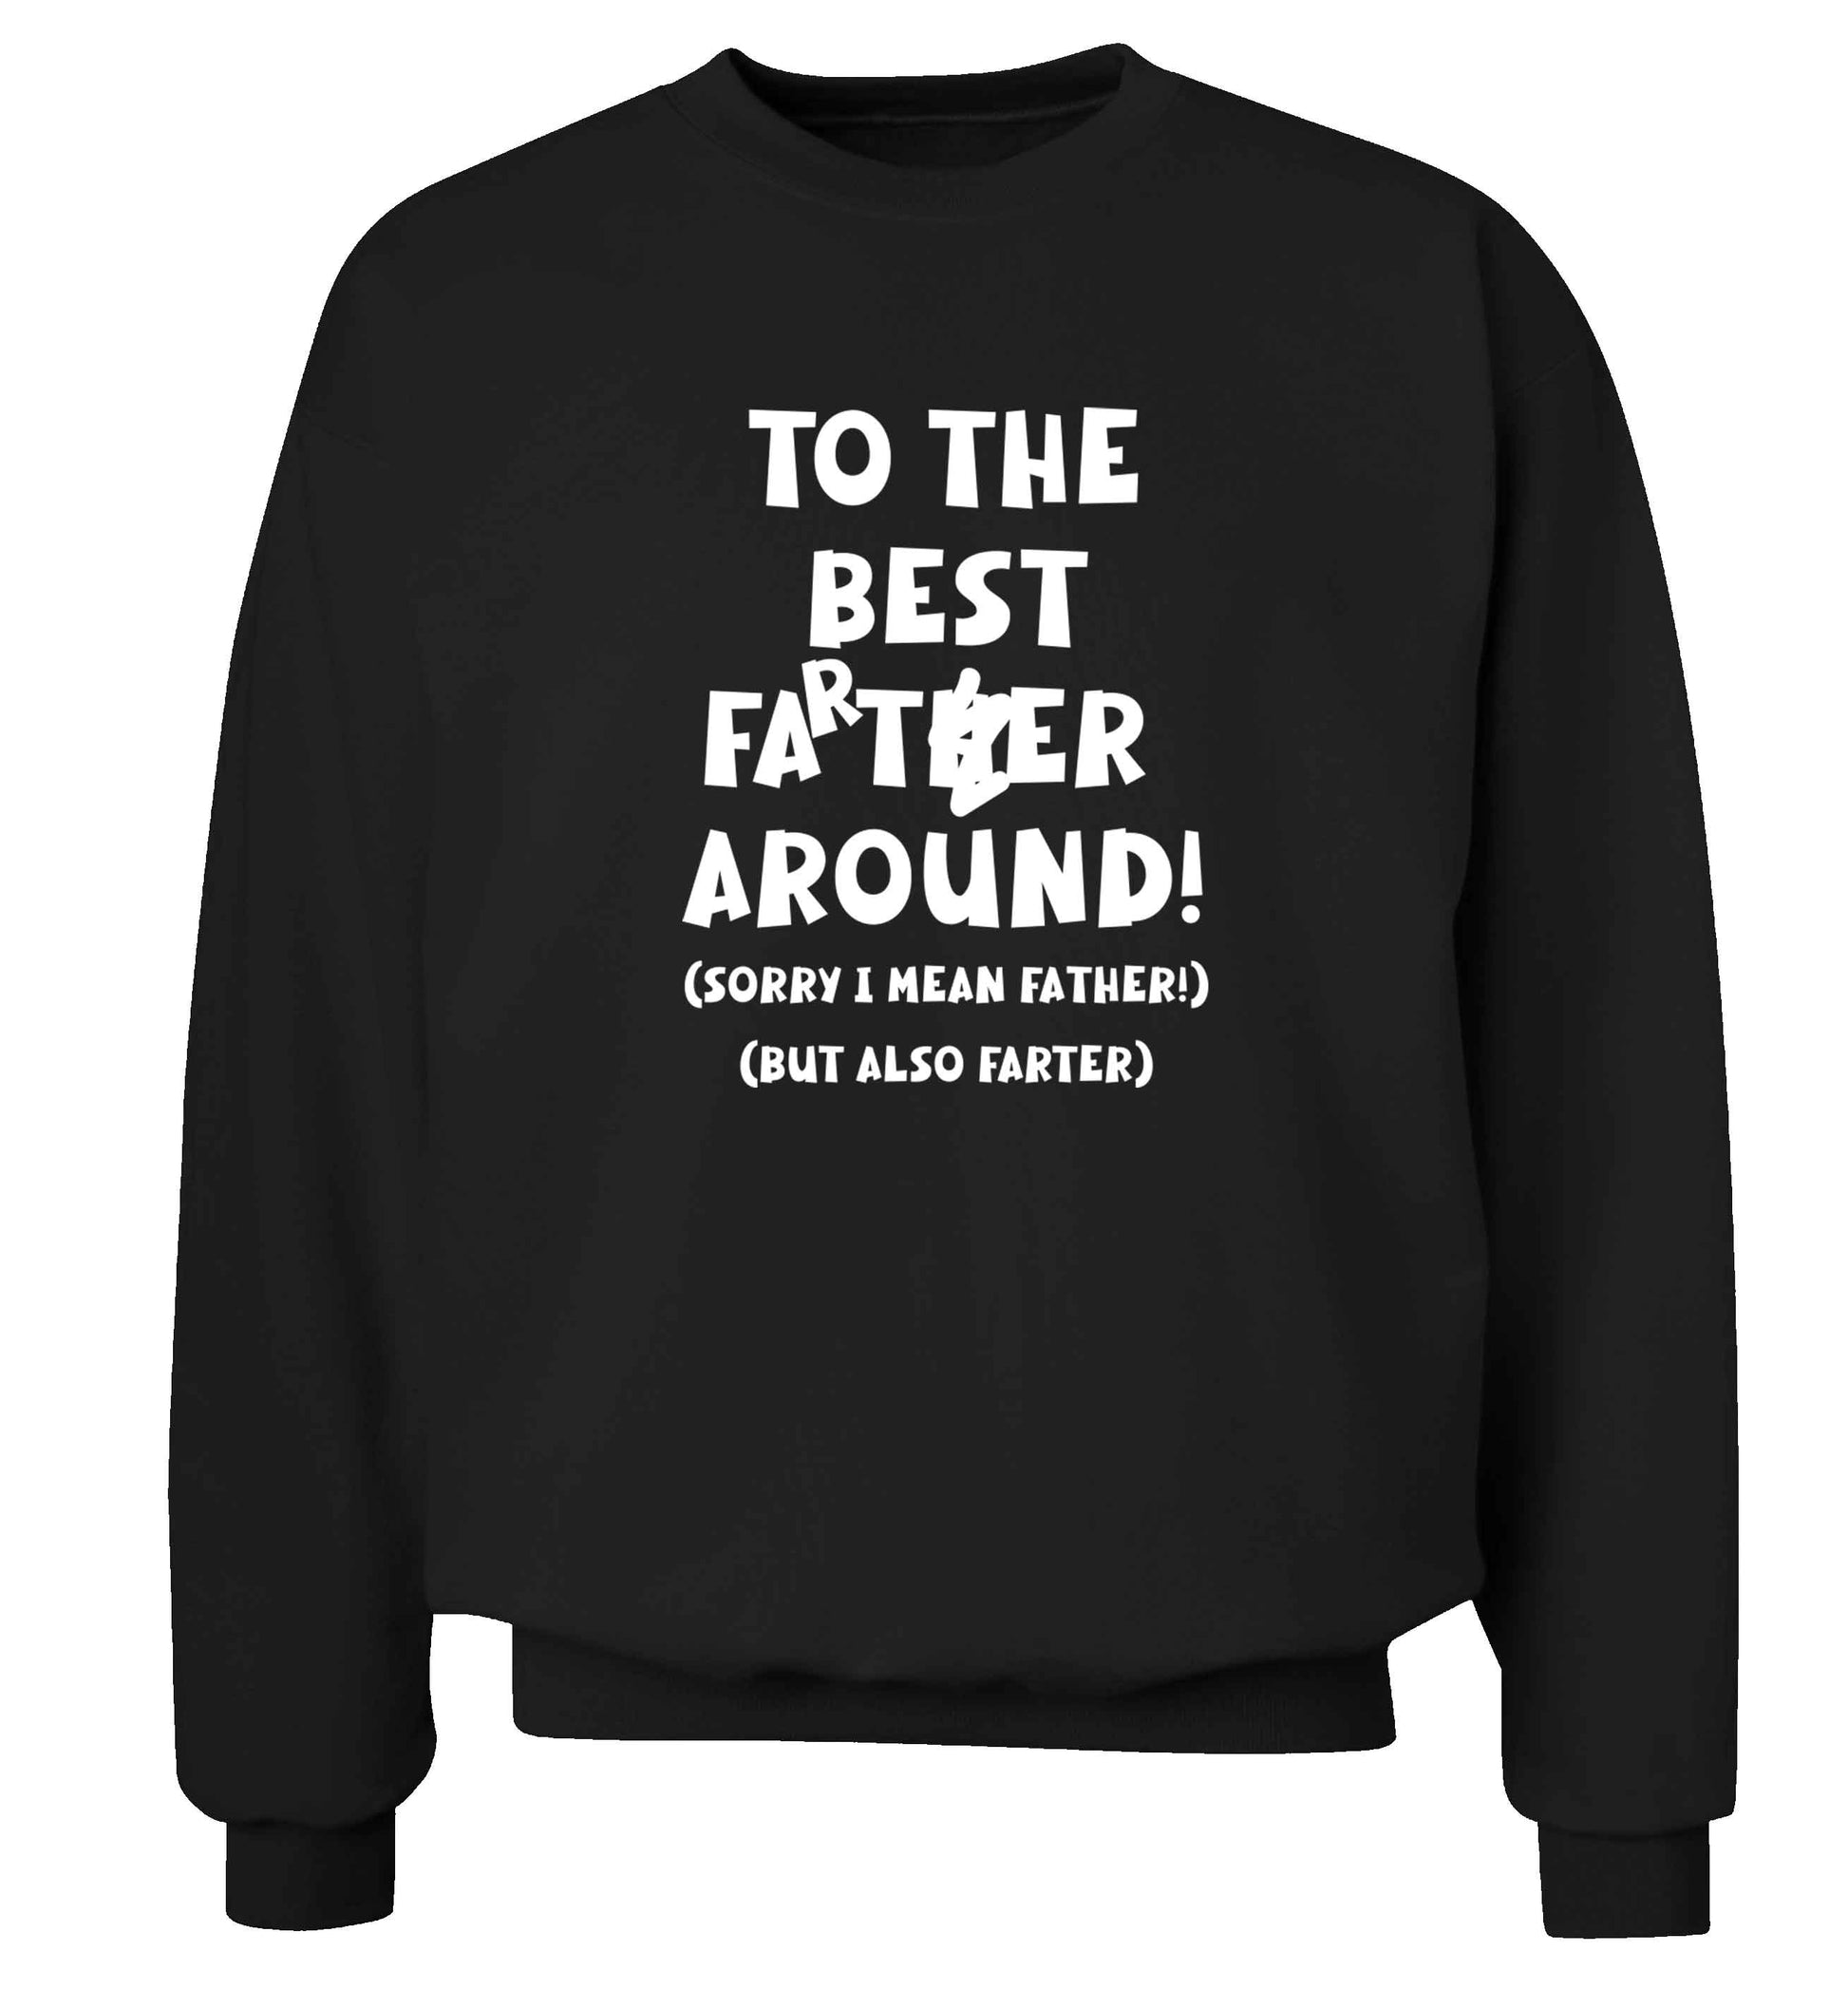 To the best farter around! Sorry I mean father, but also farter adult's unisex black sweater 2XL